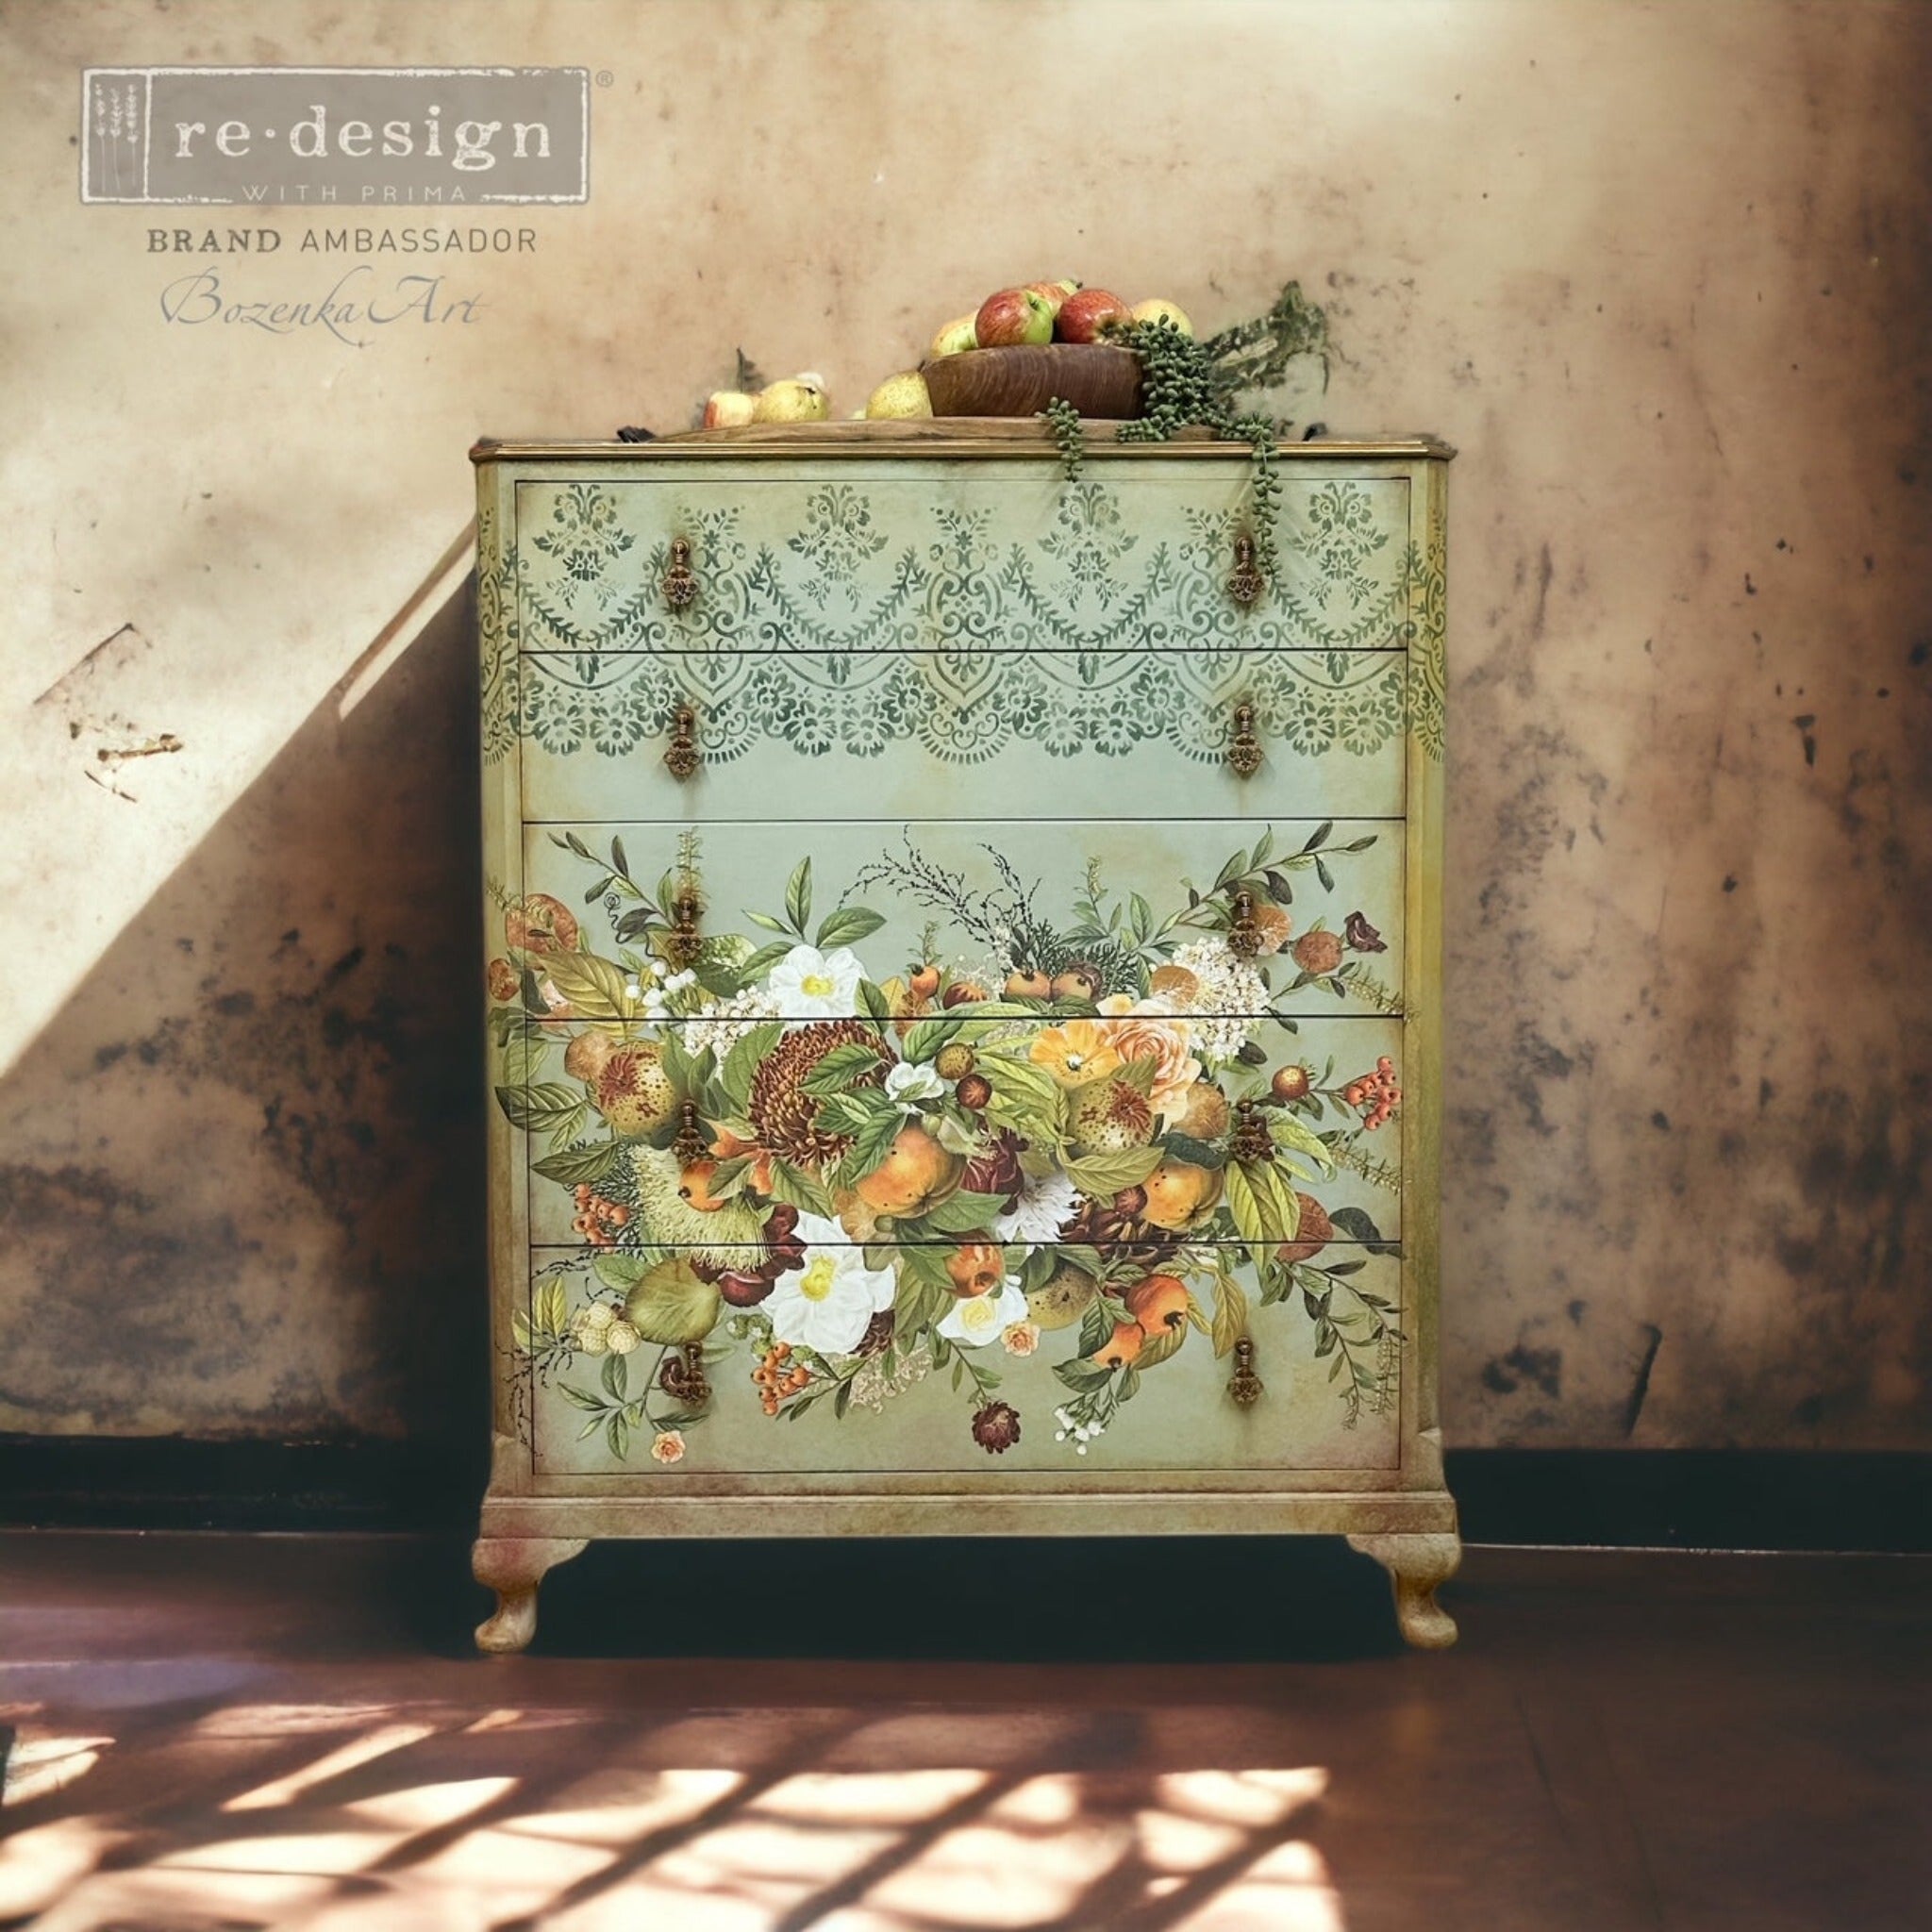 A vintage 5-drawer chest dresser refurbished by Bozenka Art is painted a blend of sea foam green, Spring green, and light brown and features ReDesign with Prima's Harvest Hues transfer on its bottom 3 drawers.